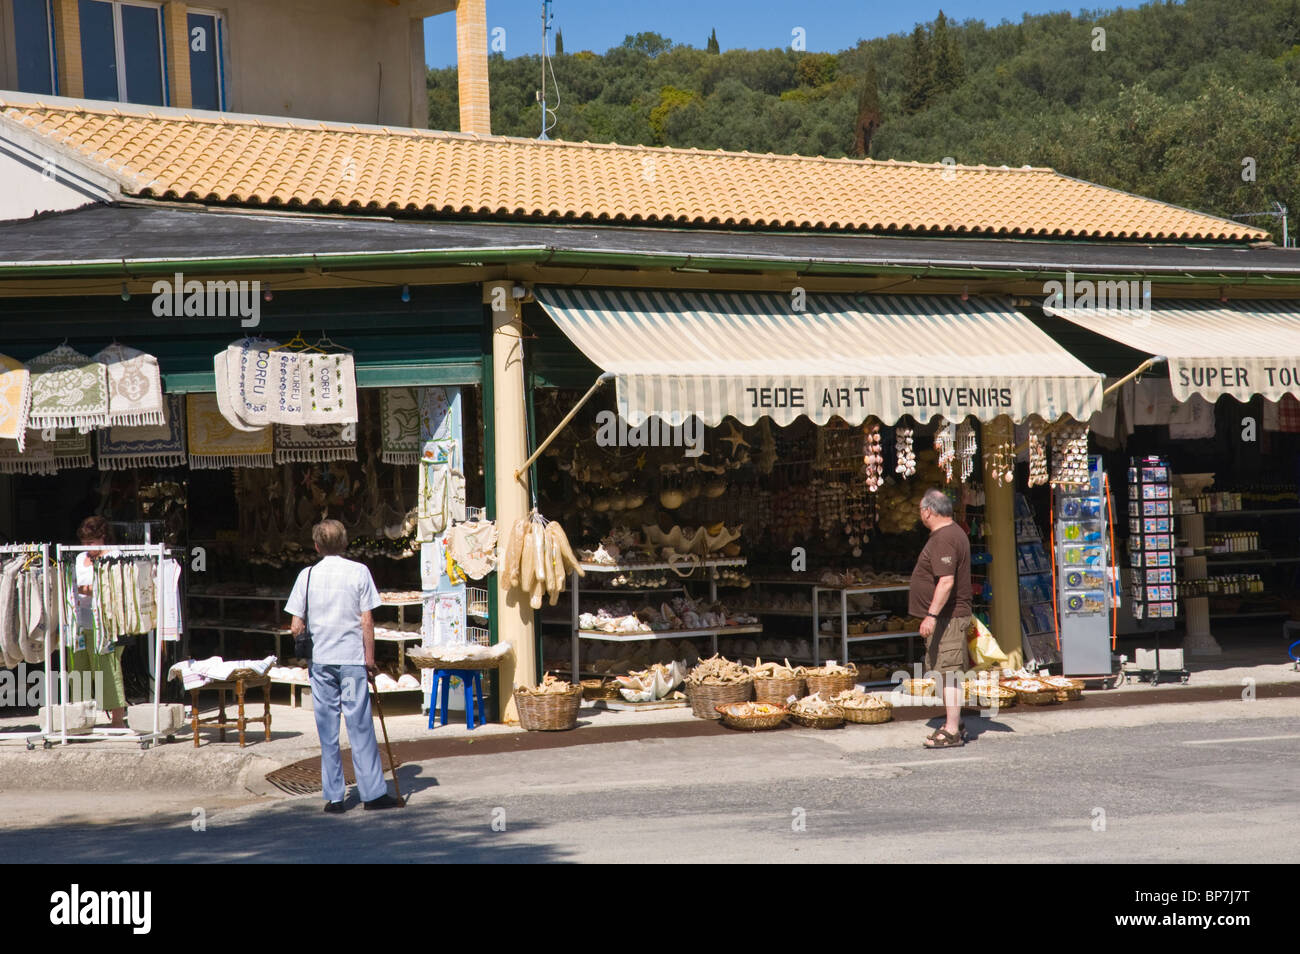 Tourist shops selling souvenirs in the mountain village of Makrades on the Greek Mediterranean island of Corfu Greece GR Stock Photo